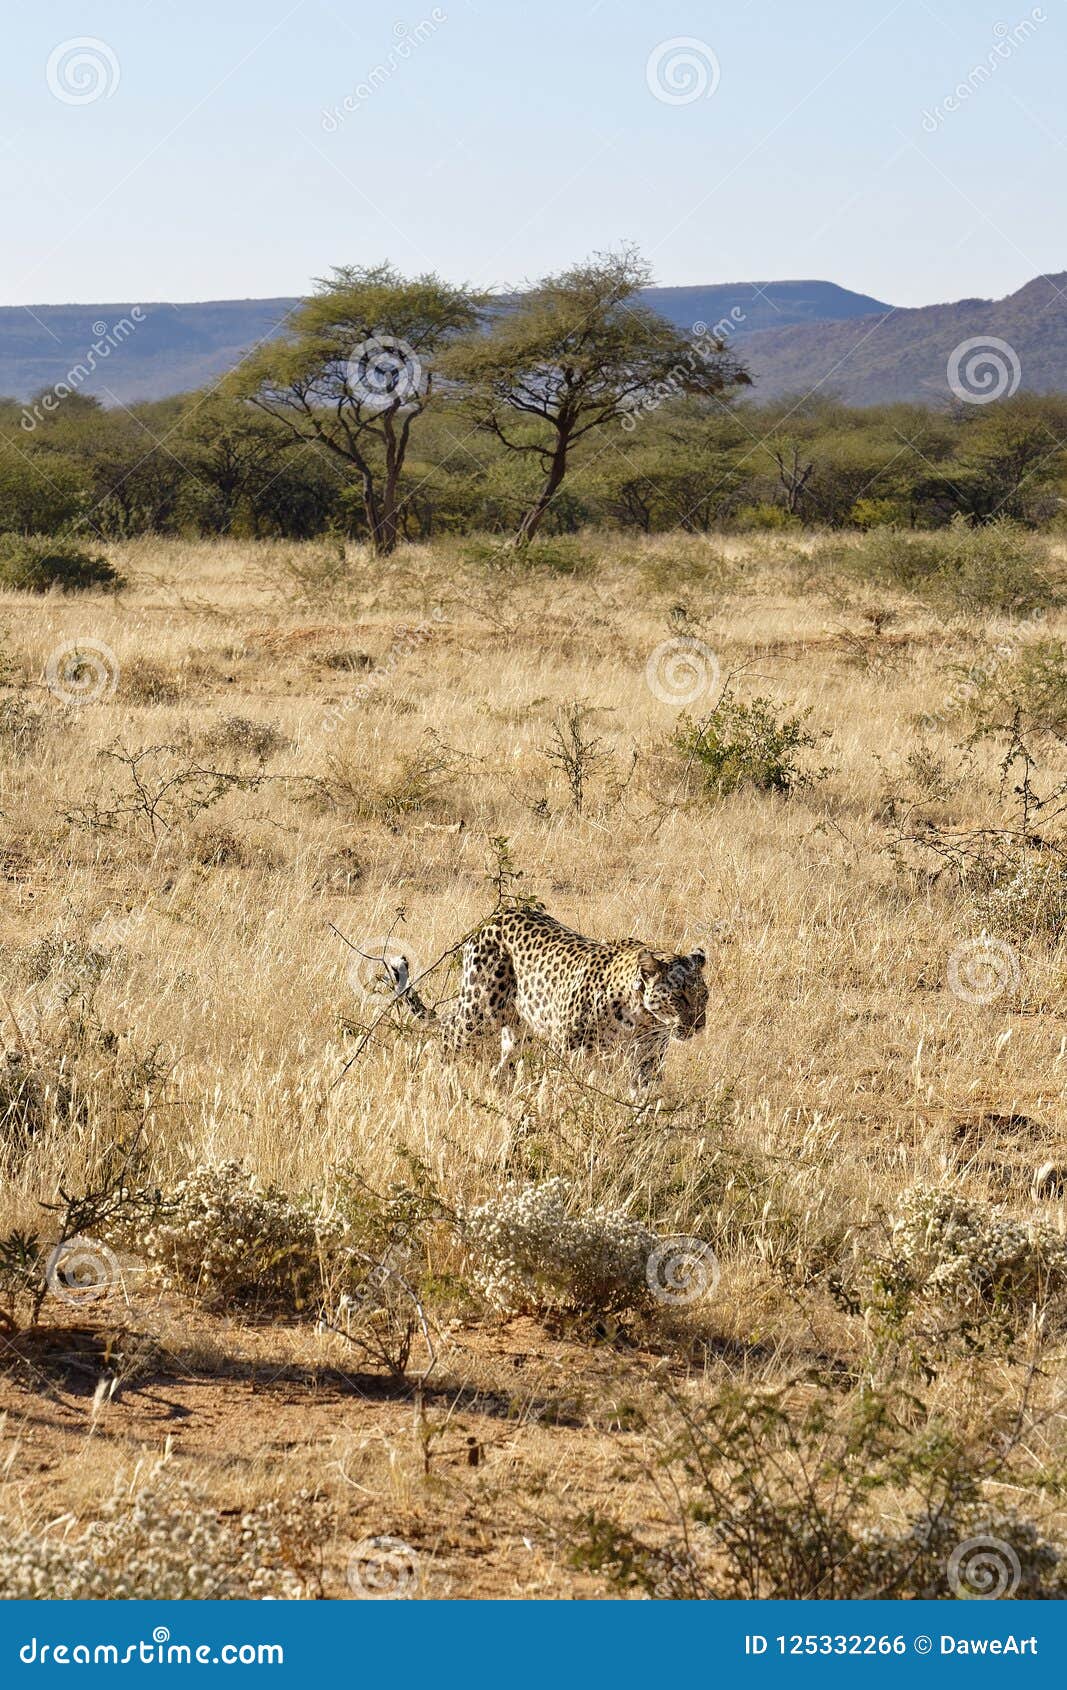 African Leopard Approaches through Dry Grass Bush-veld at Okonjima Nature Reserve, Namibia Stock - Image of brown, 125332266